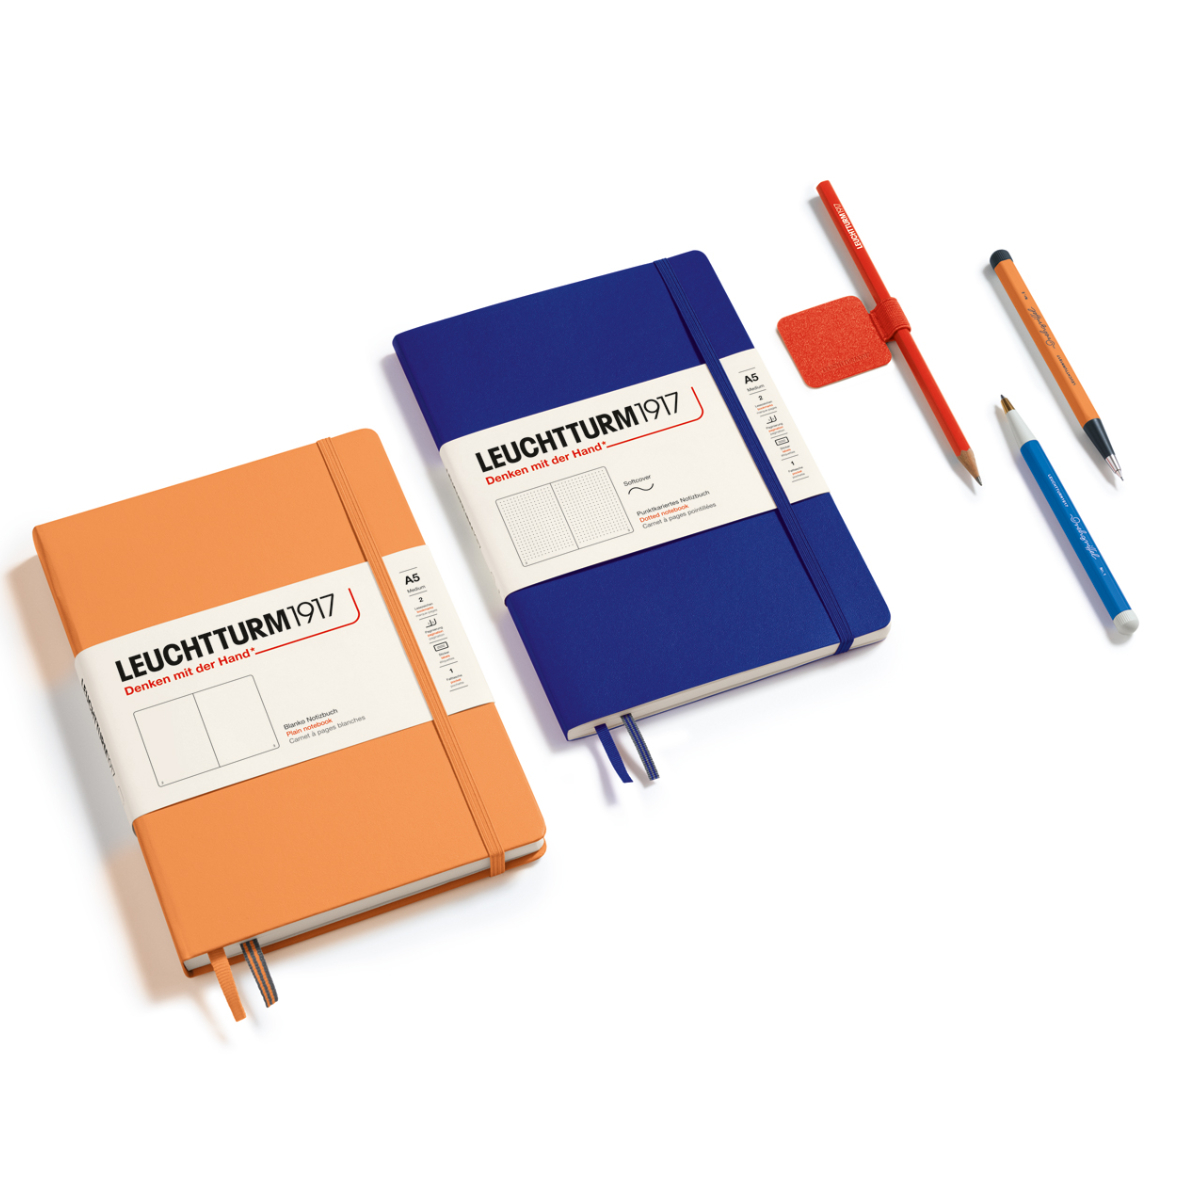 Any good Leuchtturm Alternatives? I LOVE the paper, but paying 55 euros a  month isn't worth it. Their new prices are absurd! What are some affordable  alternative options that work well for